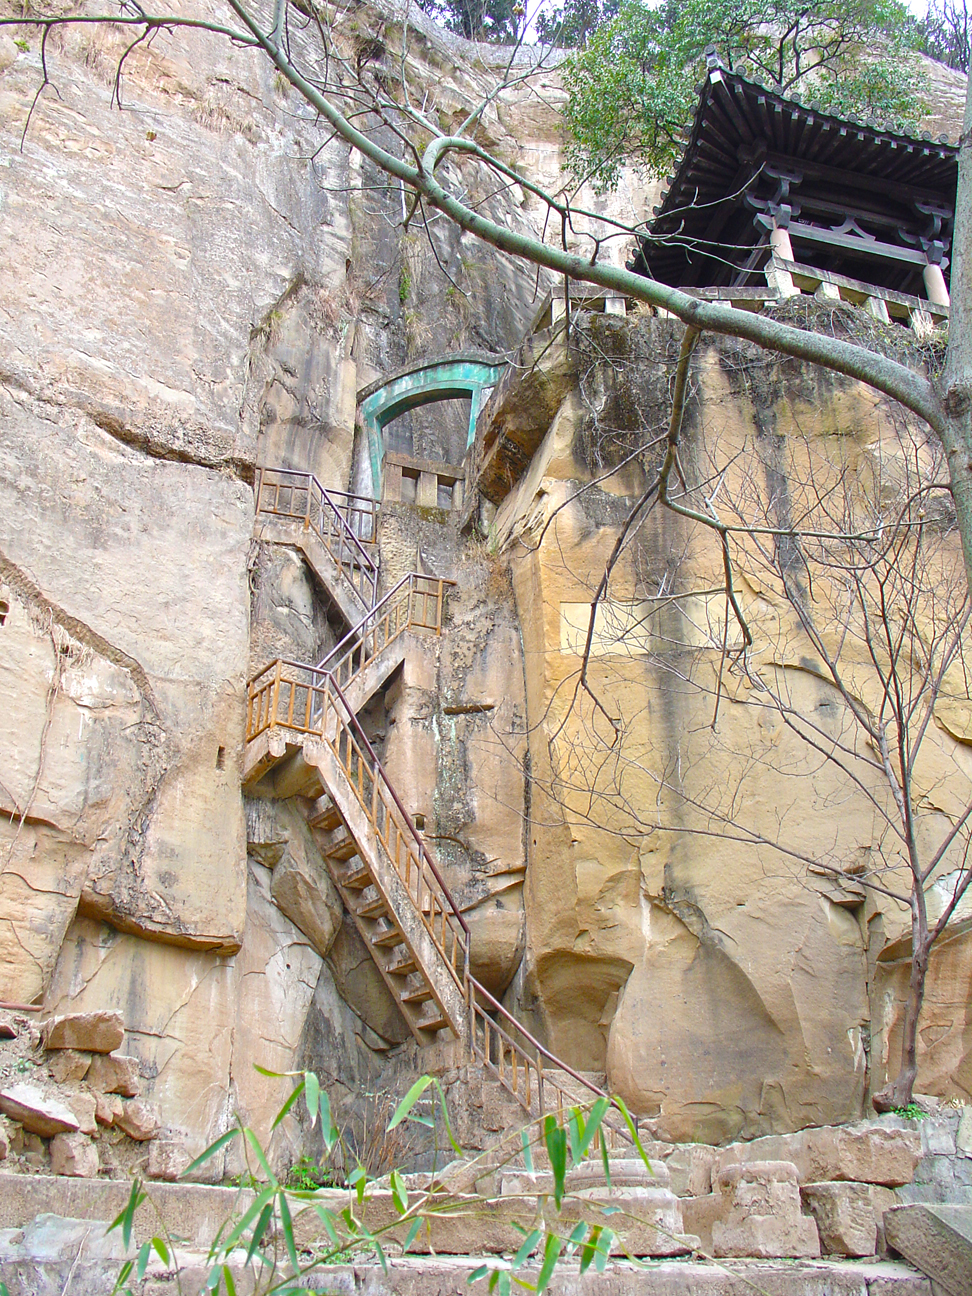 Stairs carved into the mountain